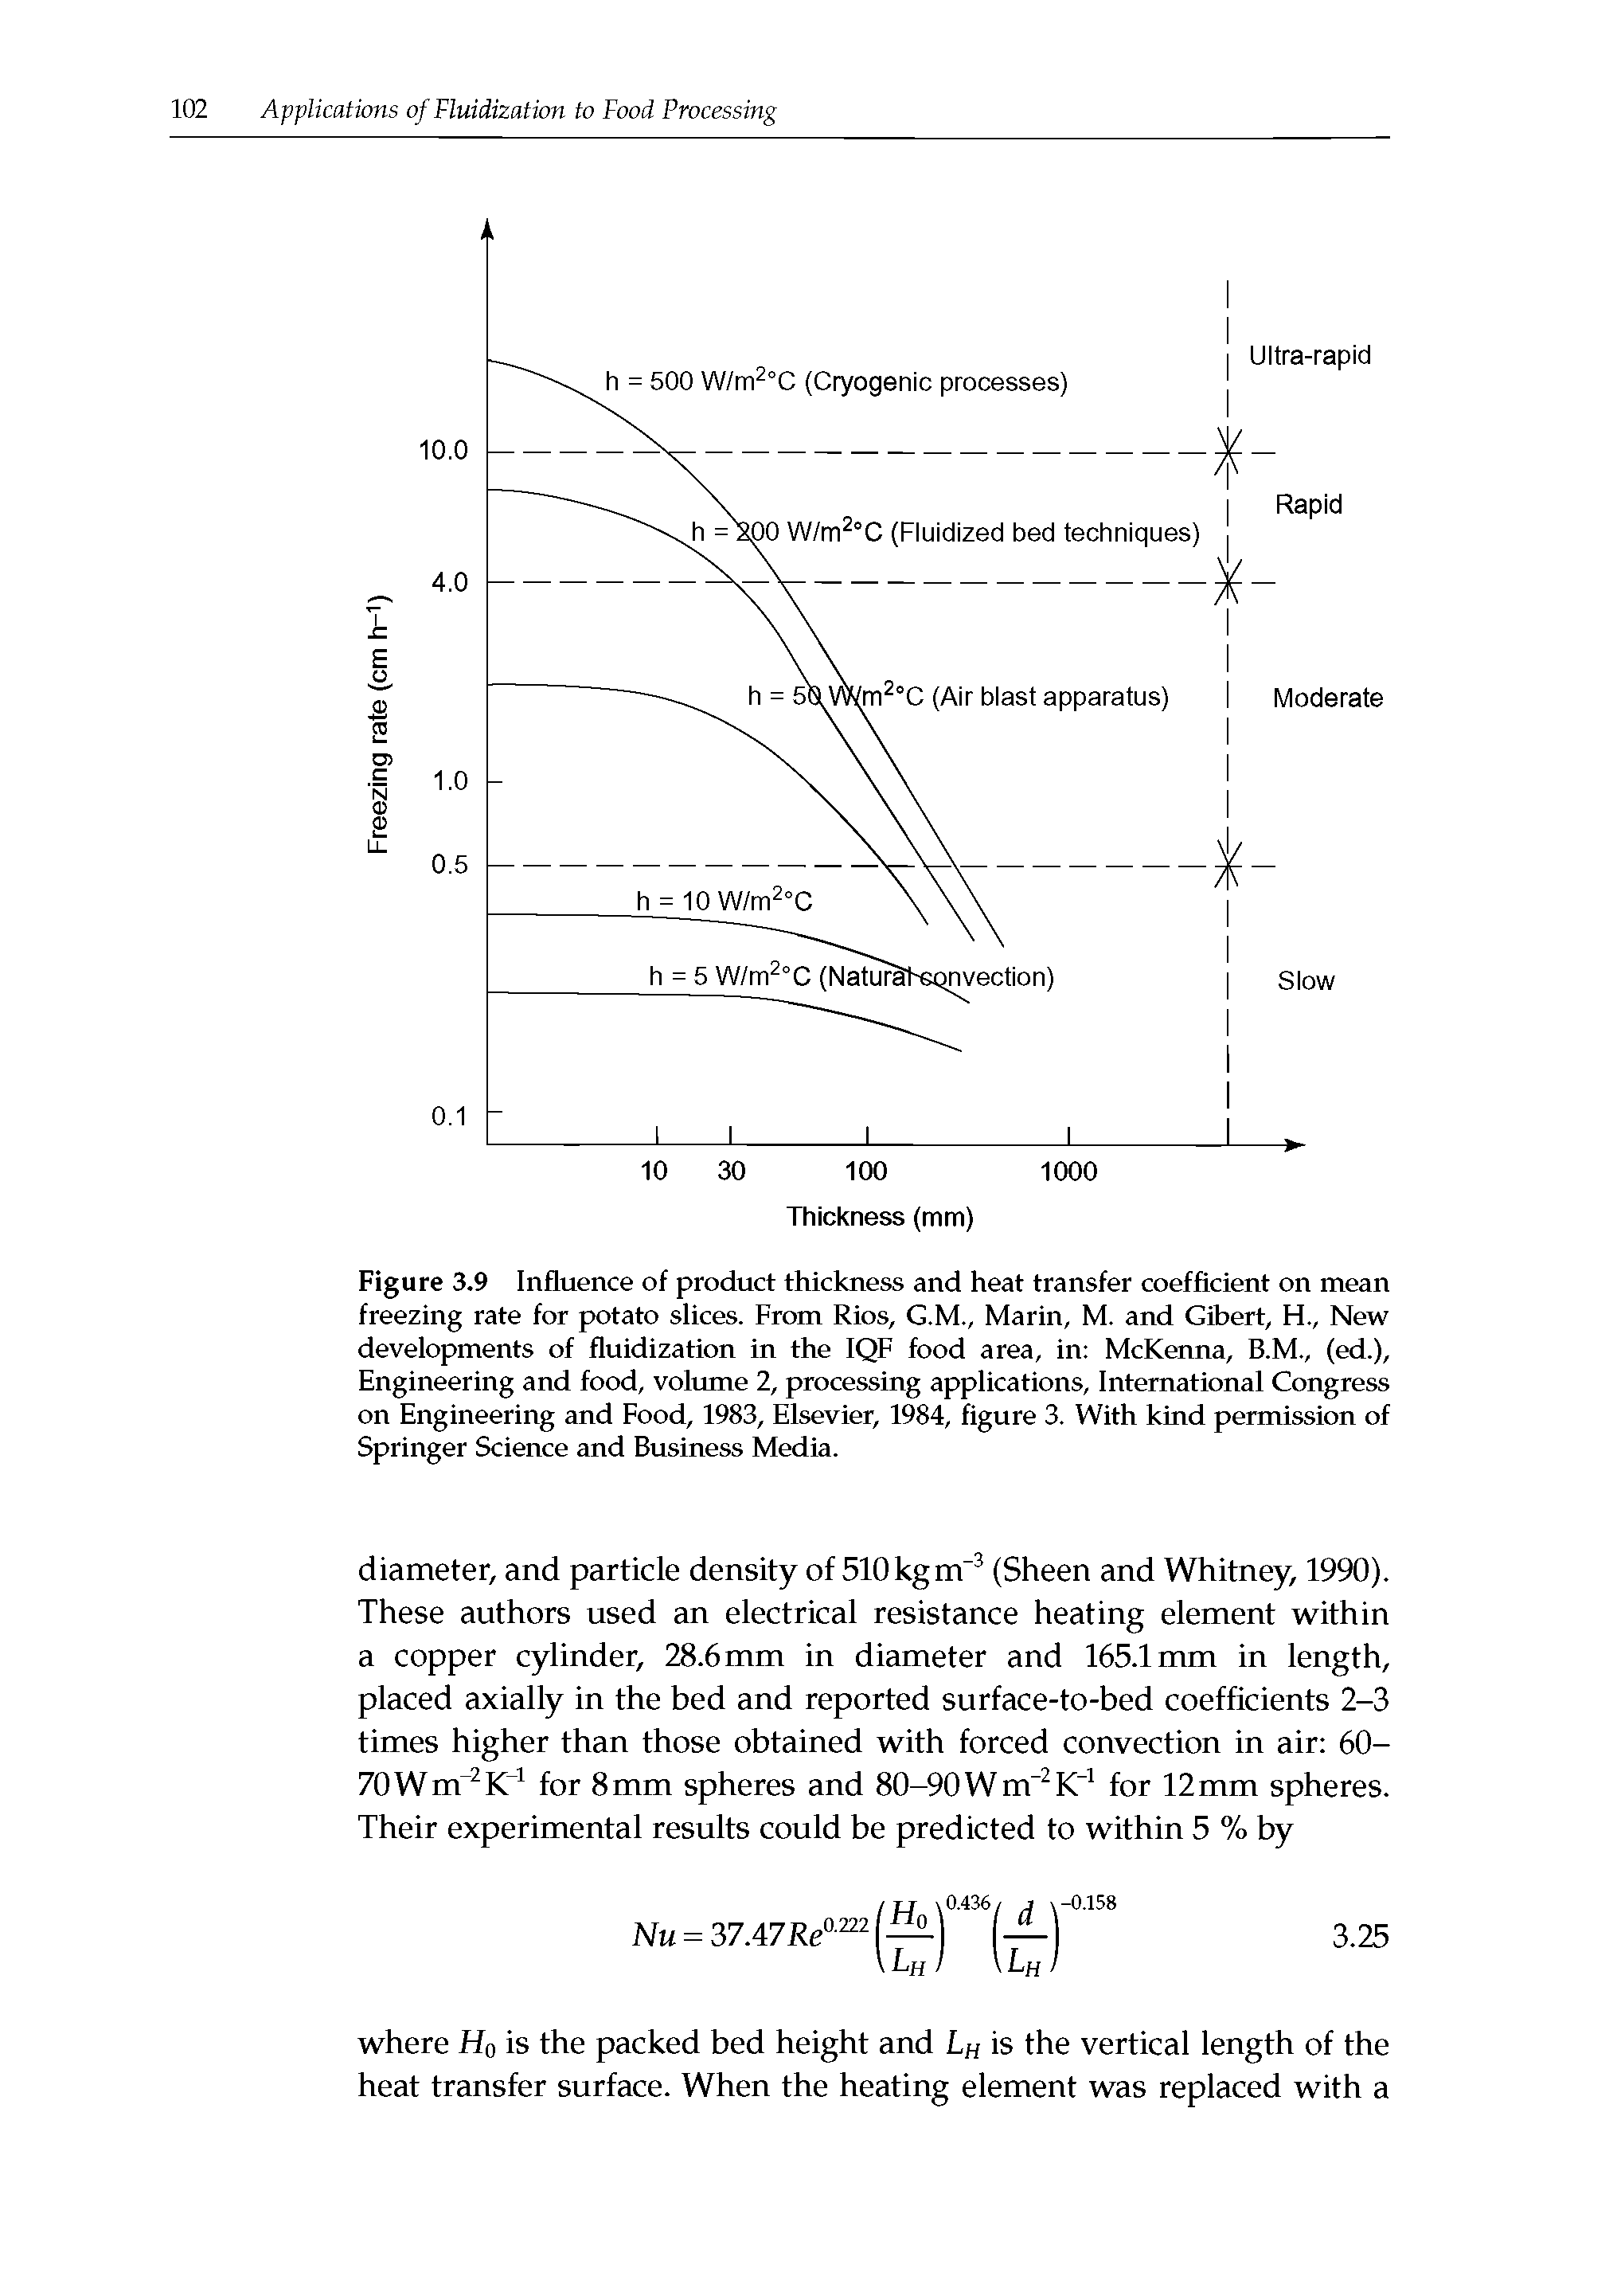 Figure 3.9 Influence of product thickness and heat transfer coefficient on mean freezing rate for potato slices. From Rios, G.M., Marin, M. and Gibert, H., New developments of fluidization in the IQF food area, in McKenna, B.M., (ed.). Engineering and food, volume 2, processing applications, International Congress on Engineering and Food, 1983, Elsevier, 1984, figure 3. With kind permission of Springer Science and Business Media.